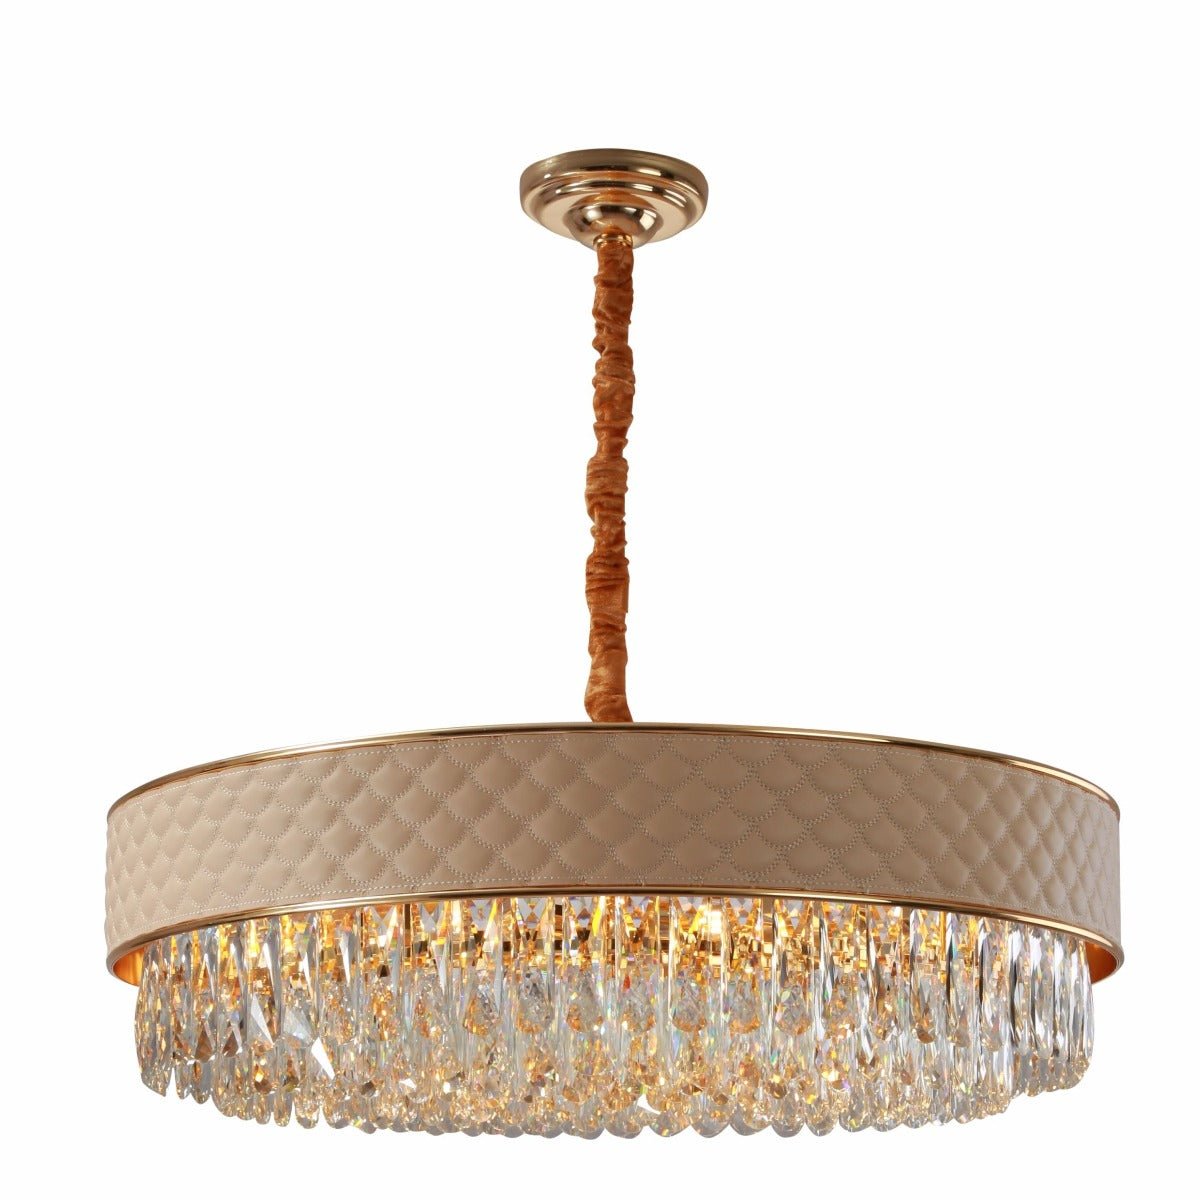 Main image of Gold Metal Cream Leather Crystal Chandelier D800 with 15xE14 Fitting | TEKLED 158-19860